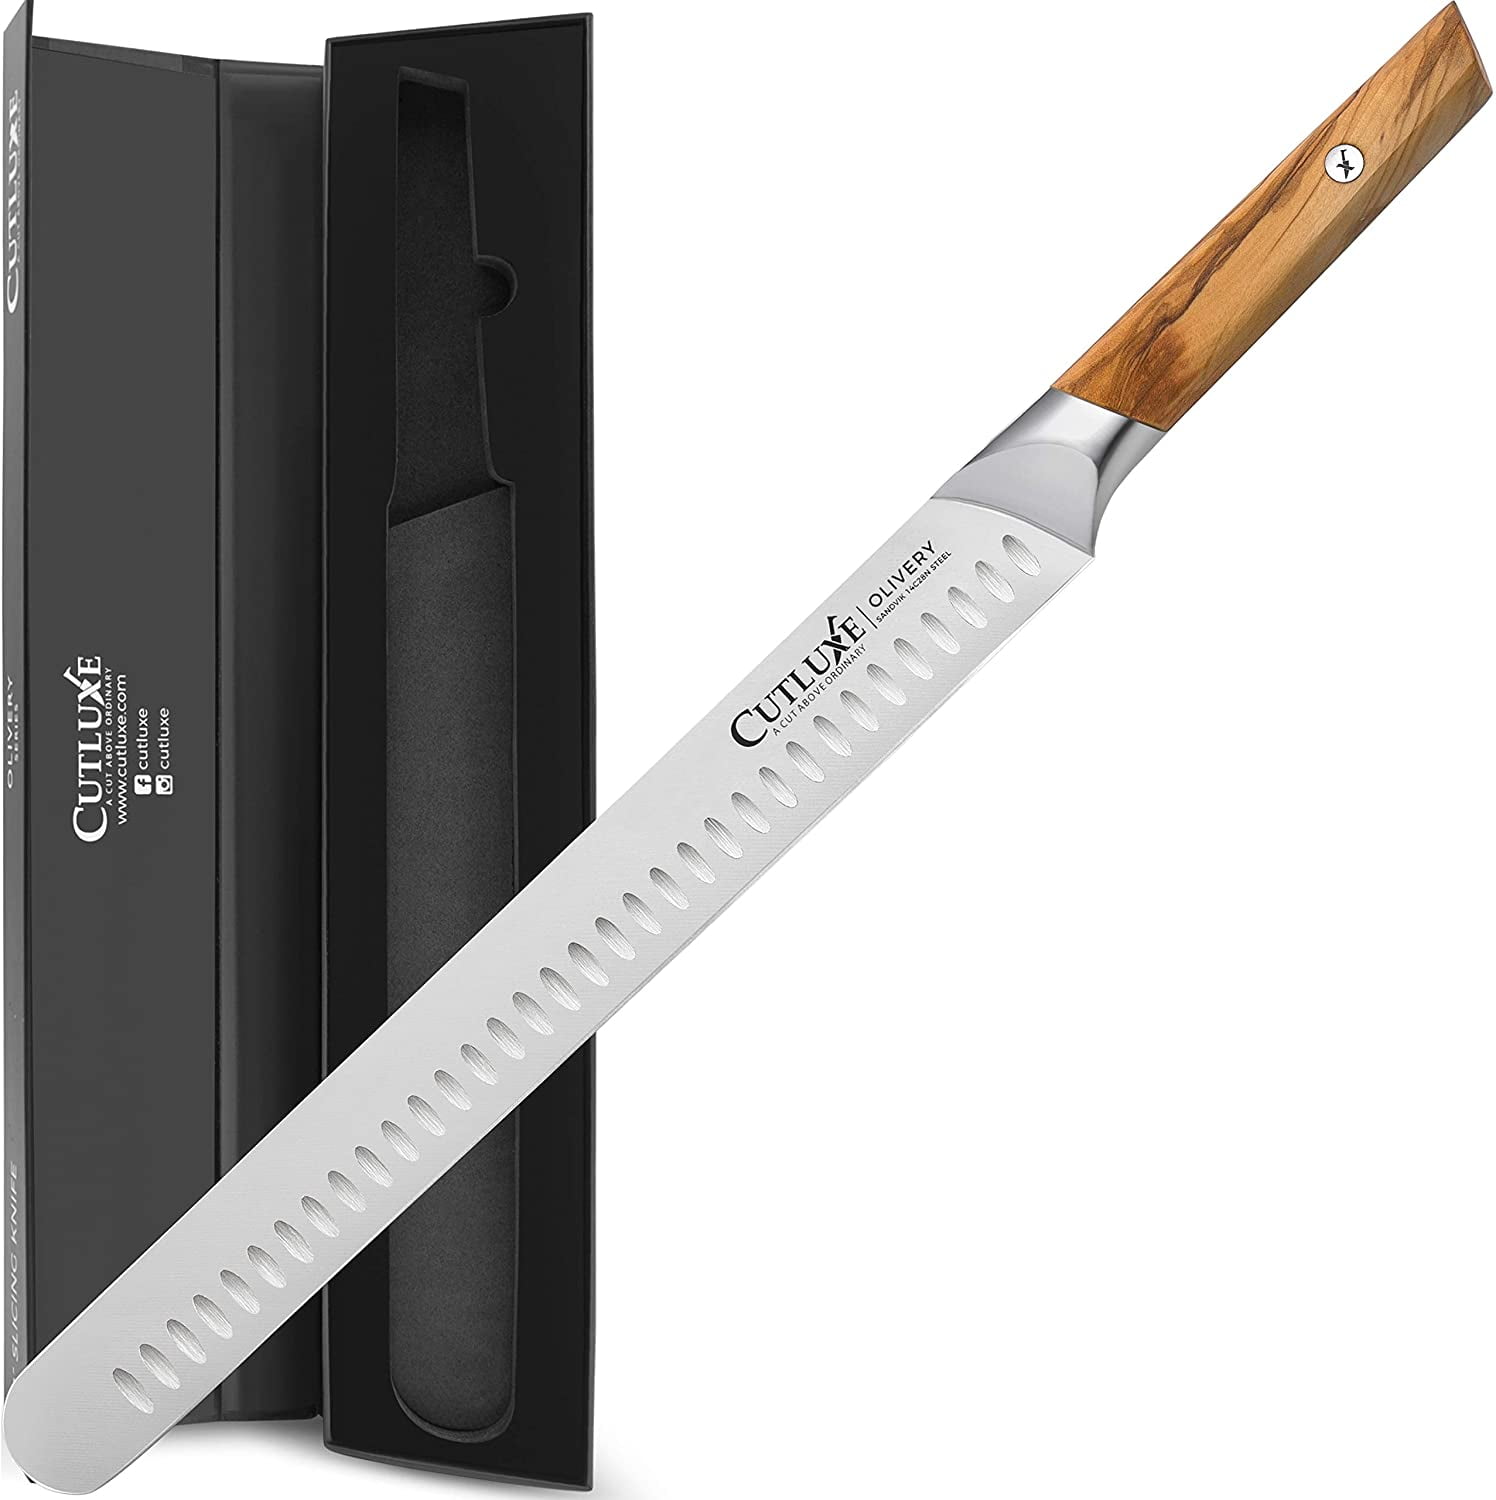 Lifespace BBQ Ham & Brisket Carving Knife - 12 Stainless Steel Blade